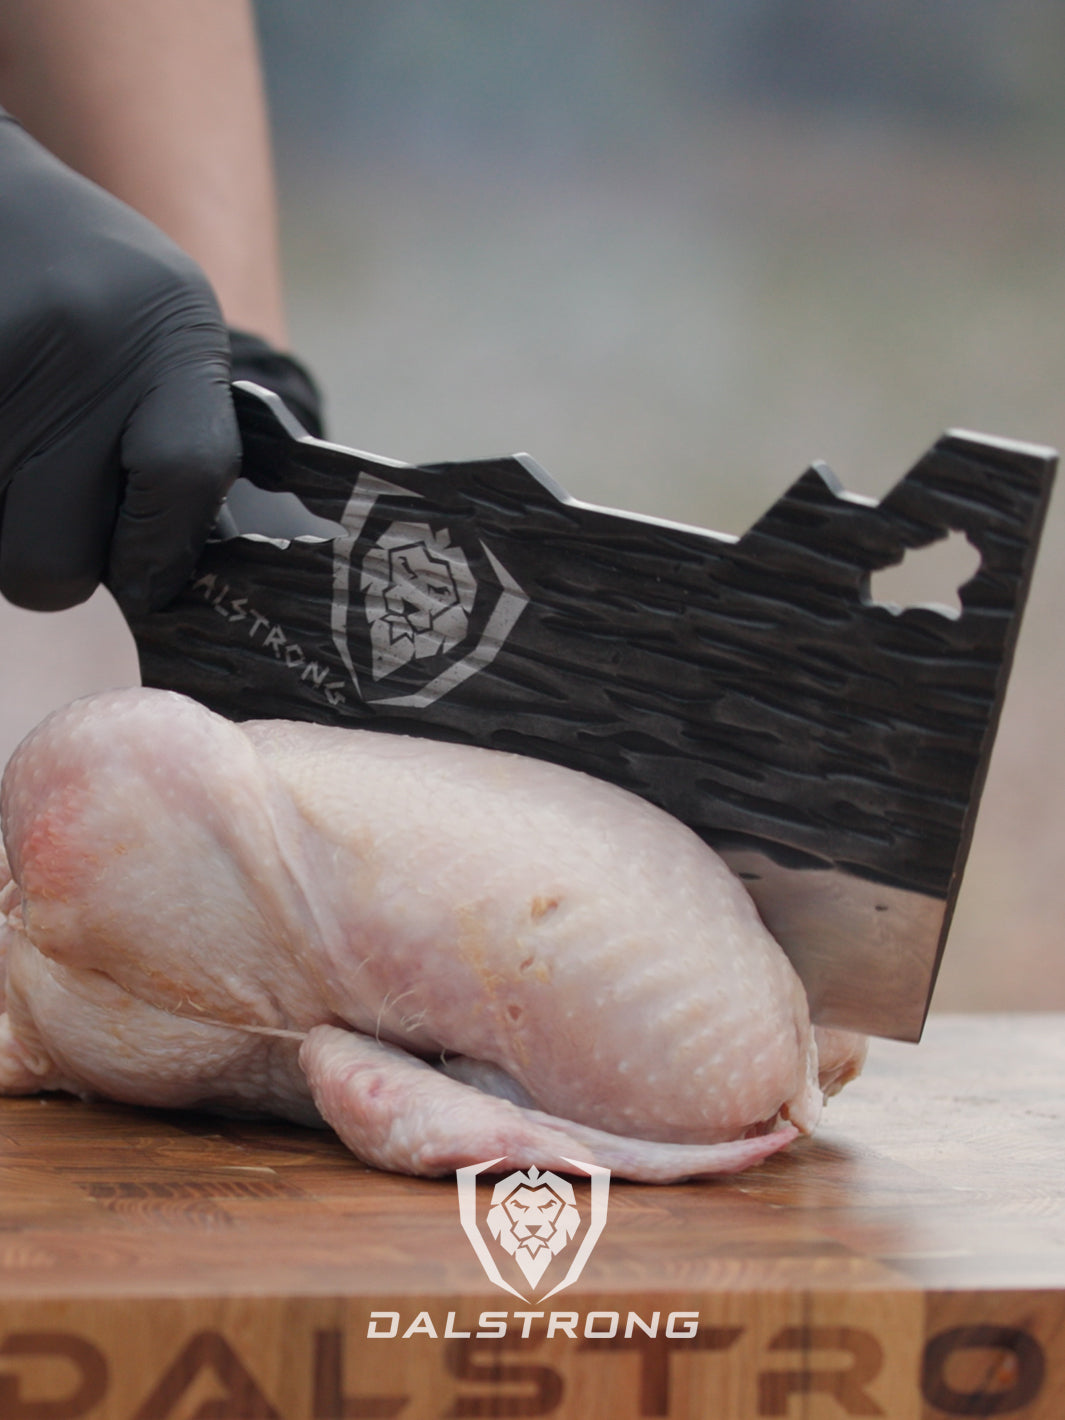 Dalstrong barbarian series obliterator cleaver knife and a whole chicken on a cutting board.